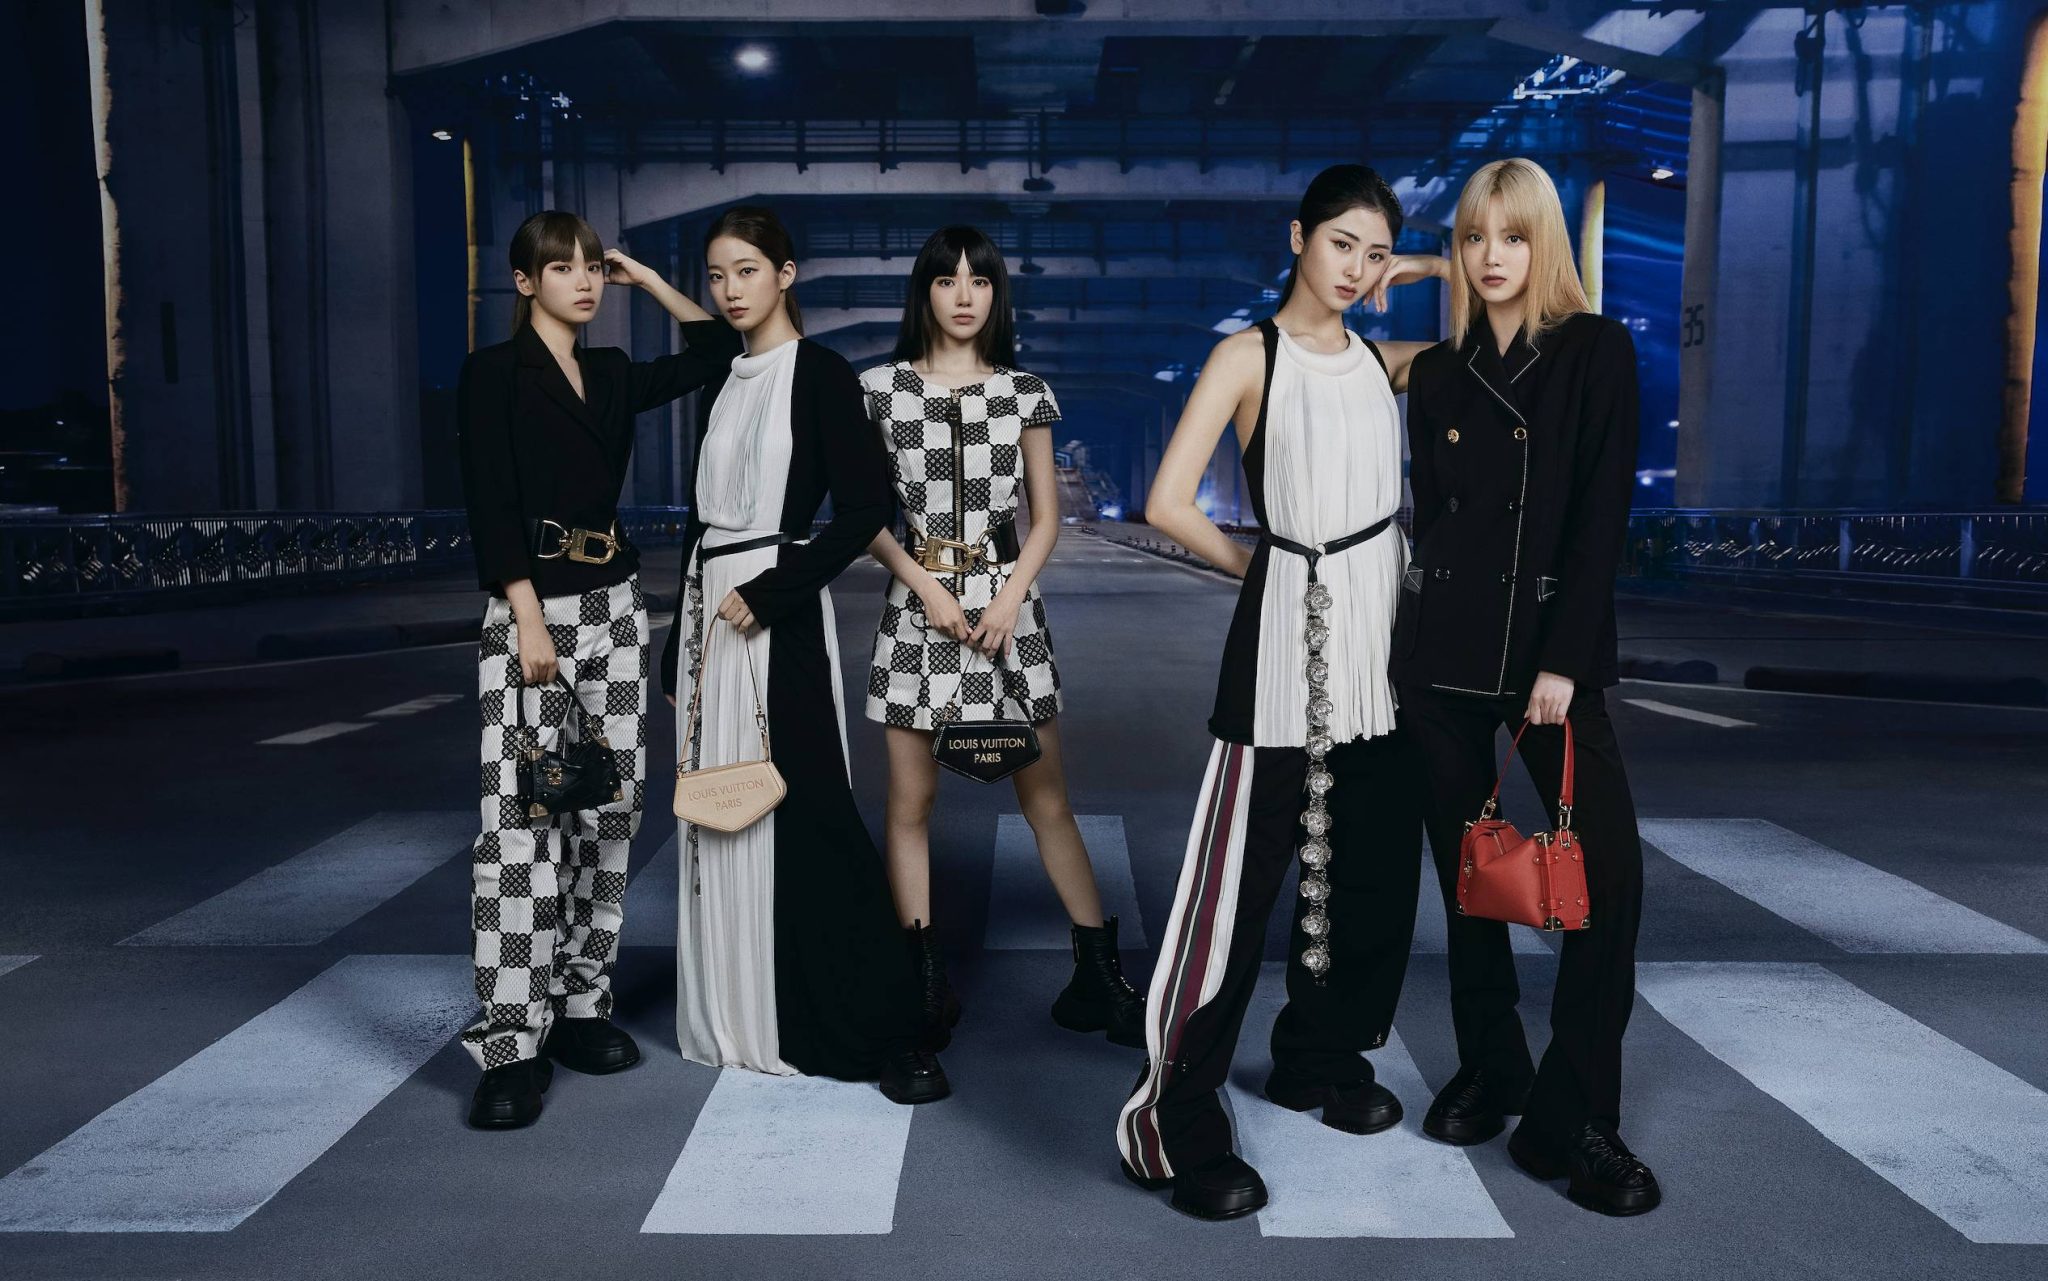 Louis Vuitton welcomes a new creative director for ready-to-wear